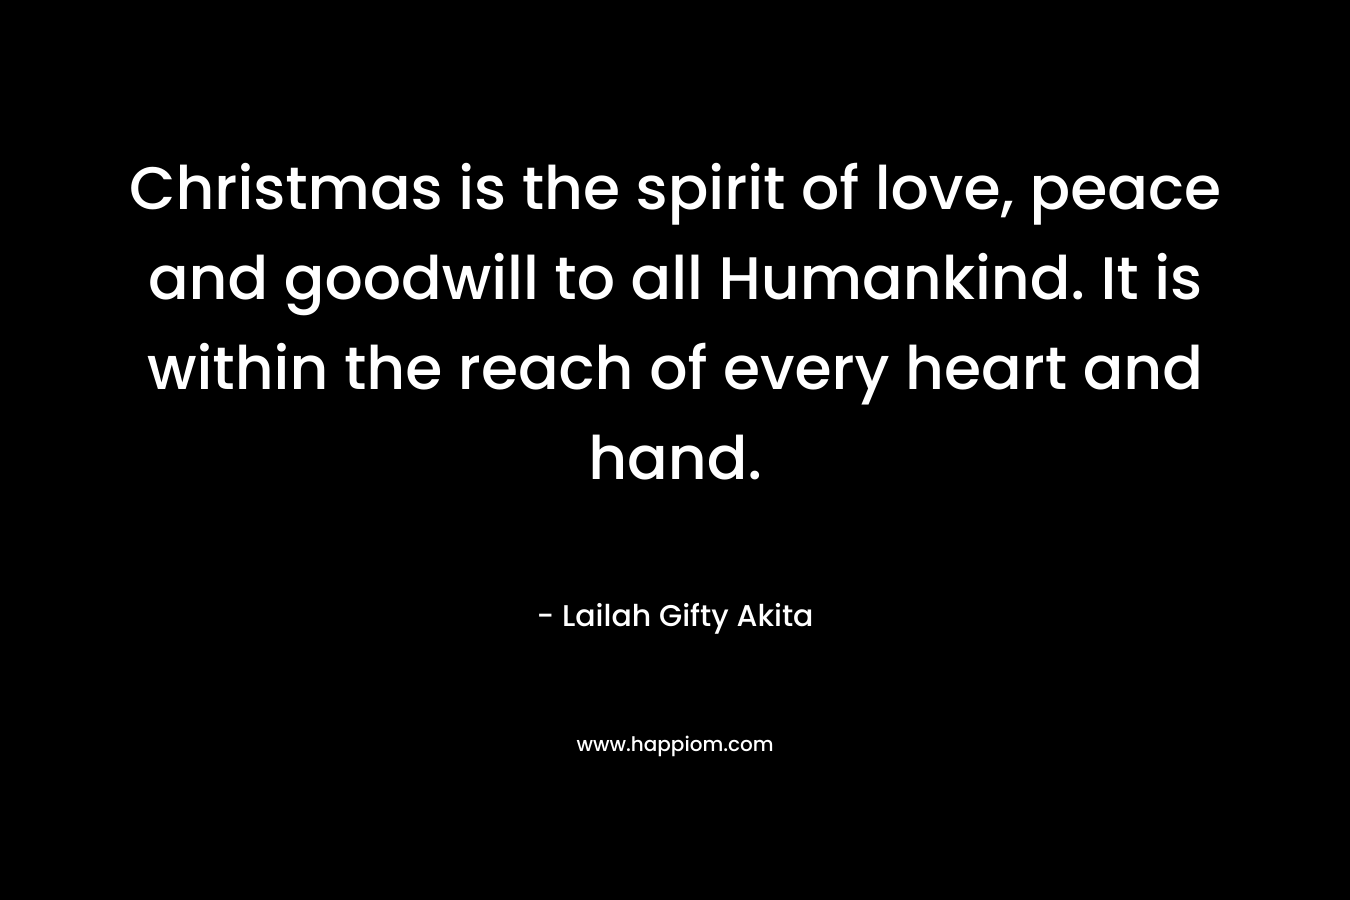 Christmas is the spirit of love, peace and goodwill to all Humankind. It is within the reach of every heart and hand.